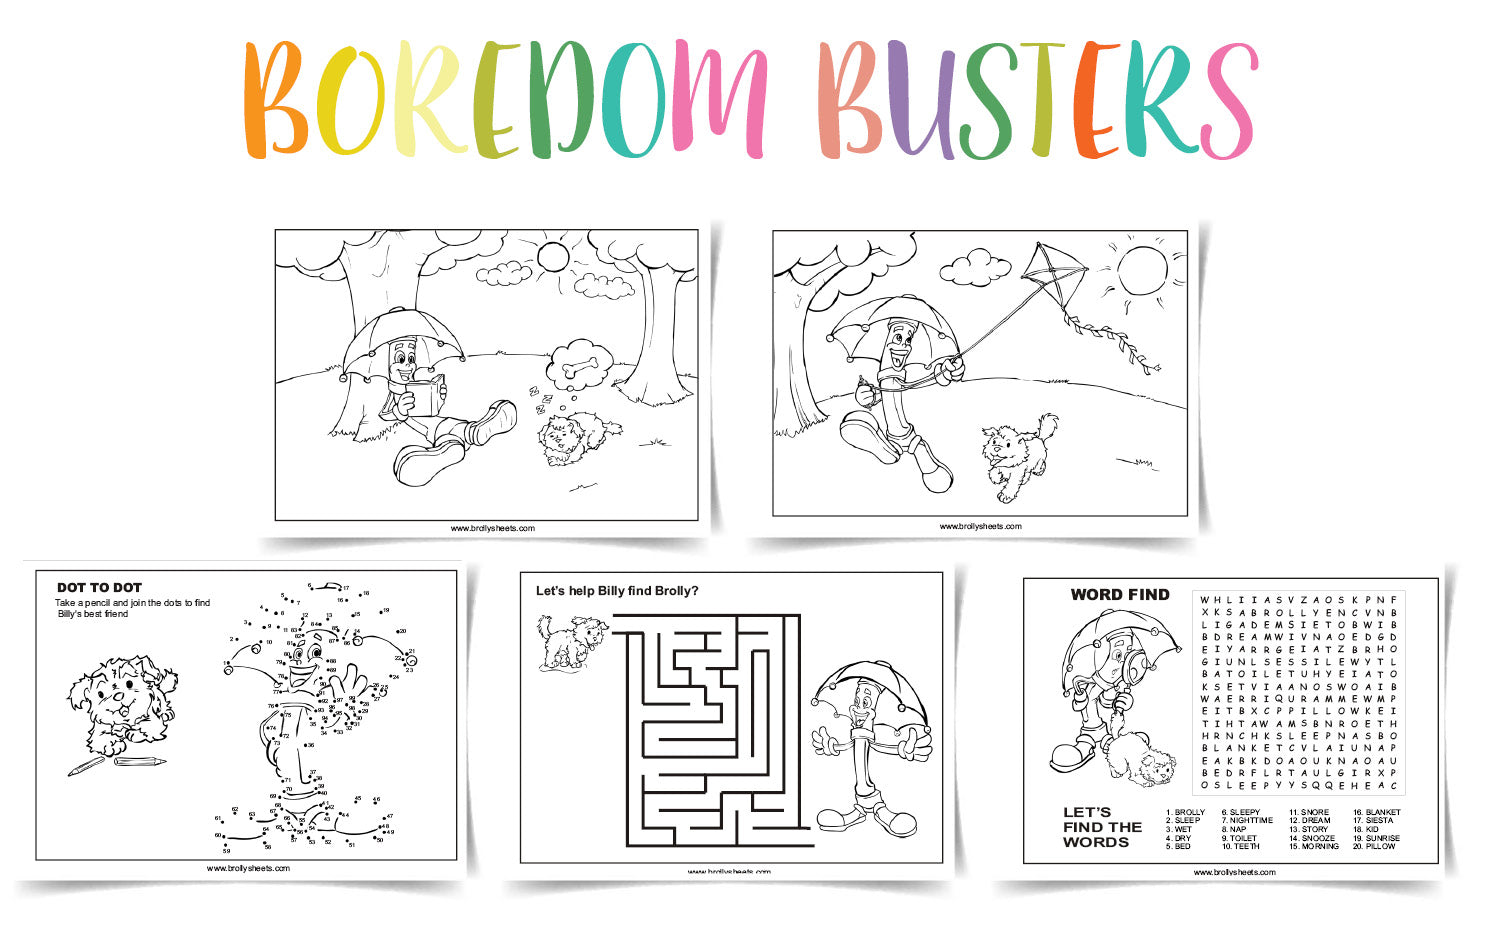 Boredom Busters - Brolly Sheets NZ